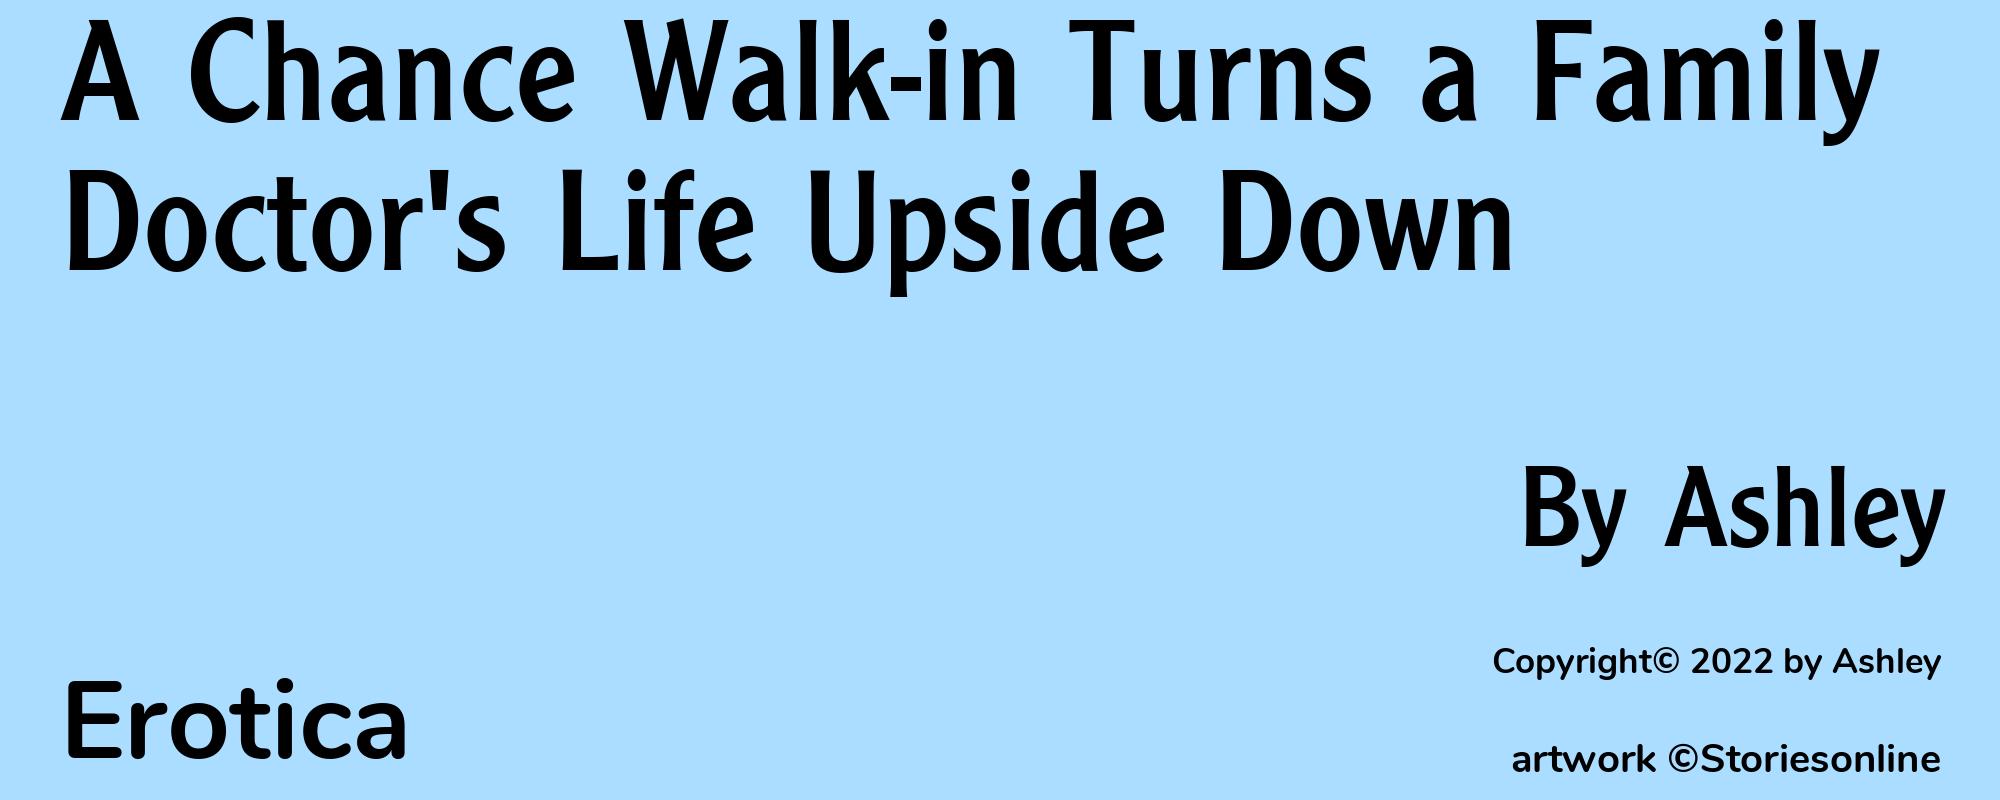 A Chance Walk-in Turns a Family Doctor's Life Upside Down - Cover